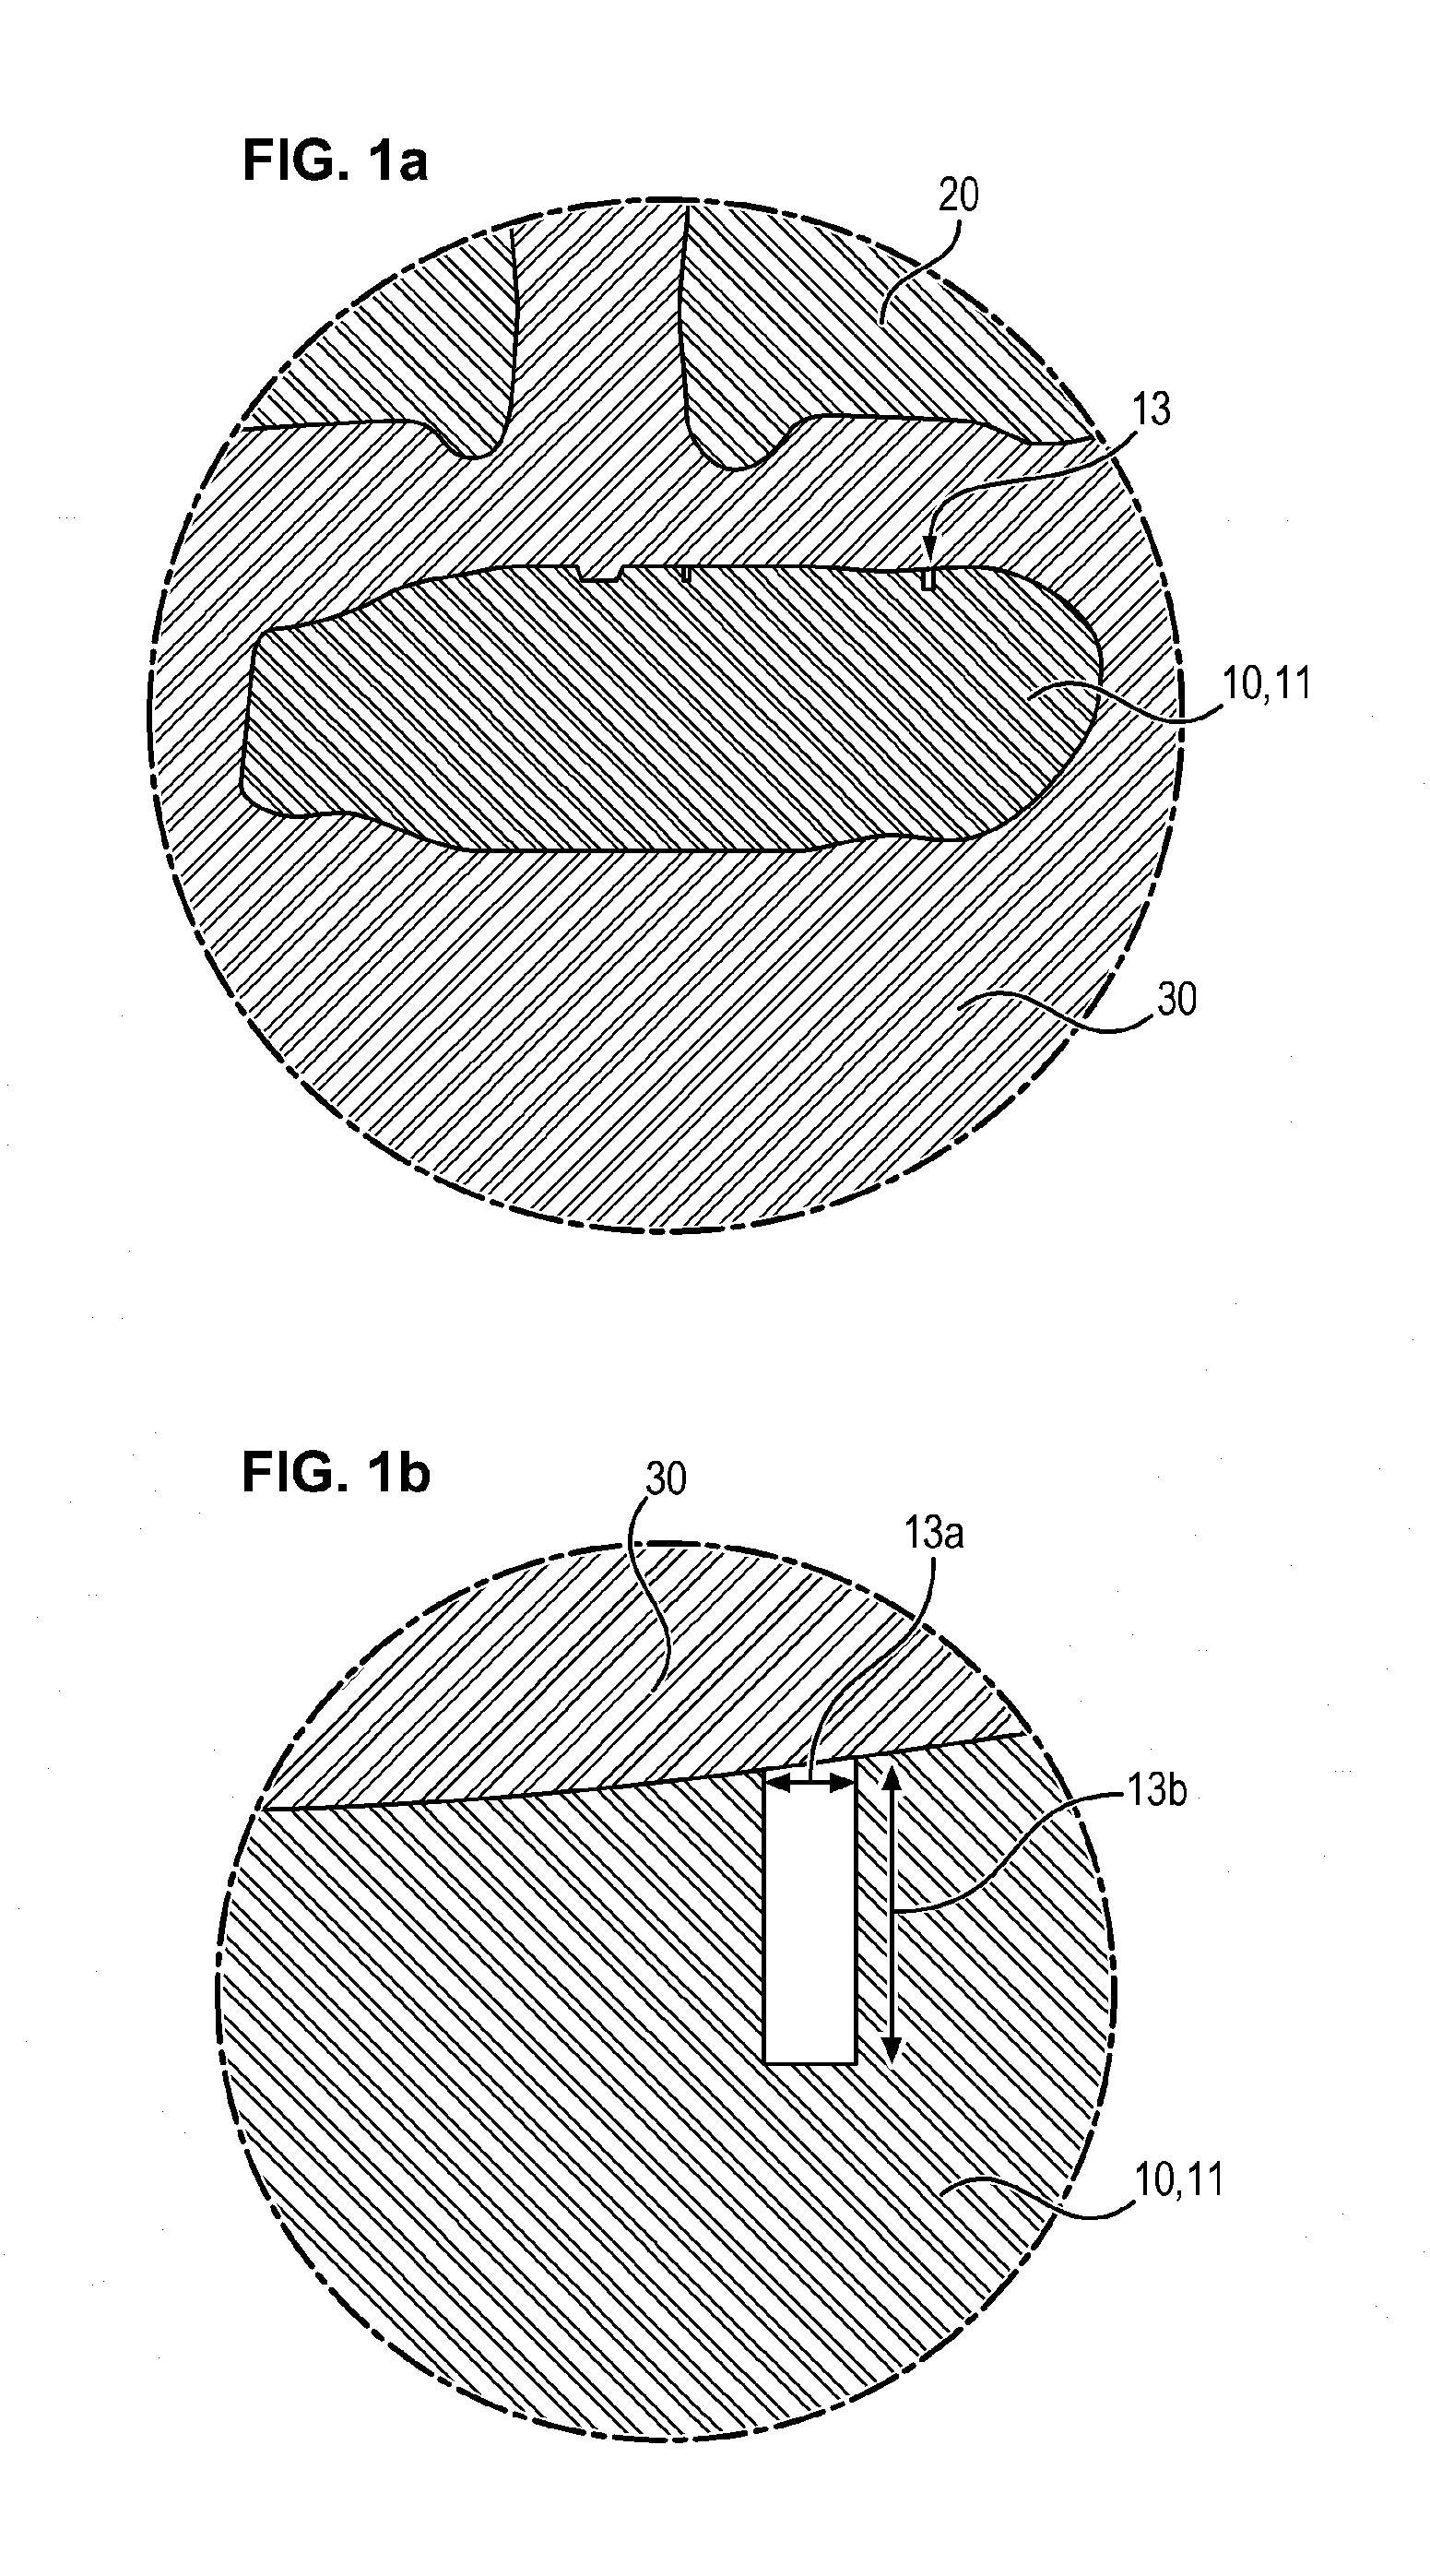 Creation of slots on the surface of a core